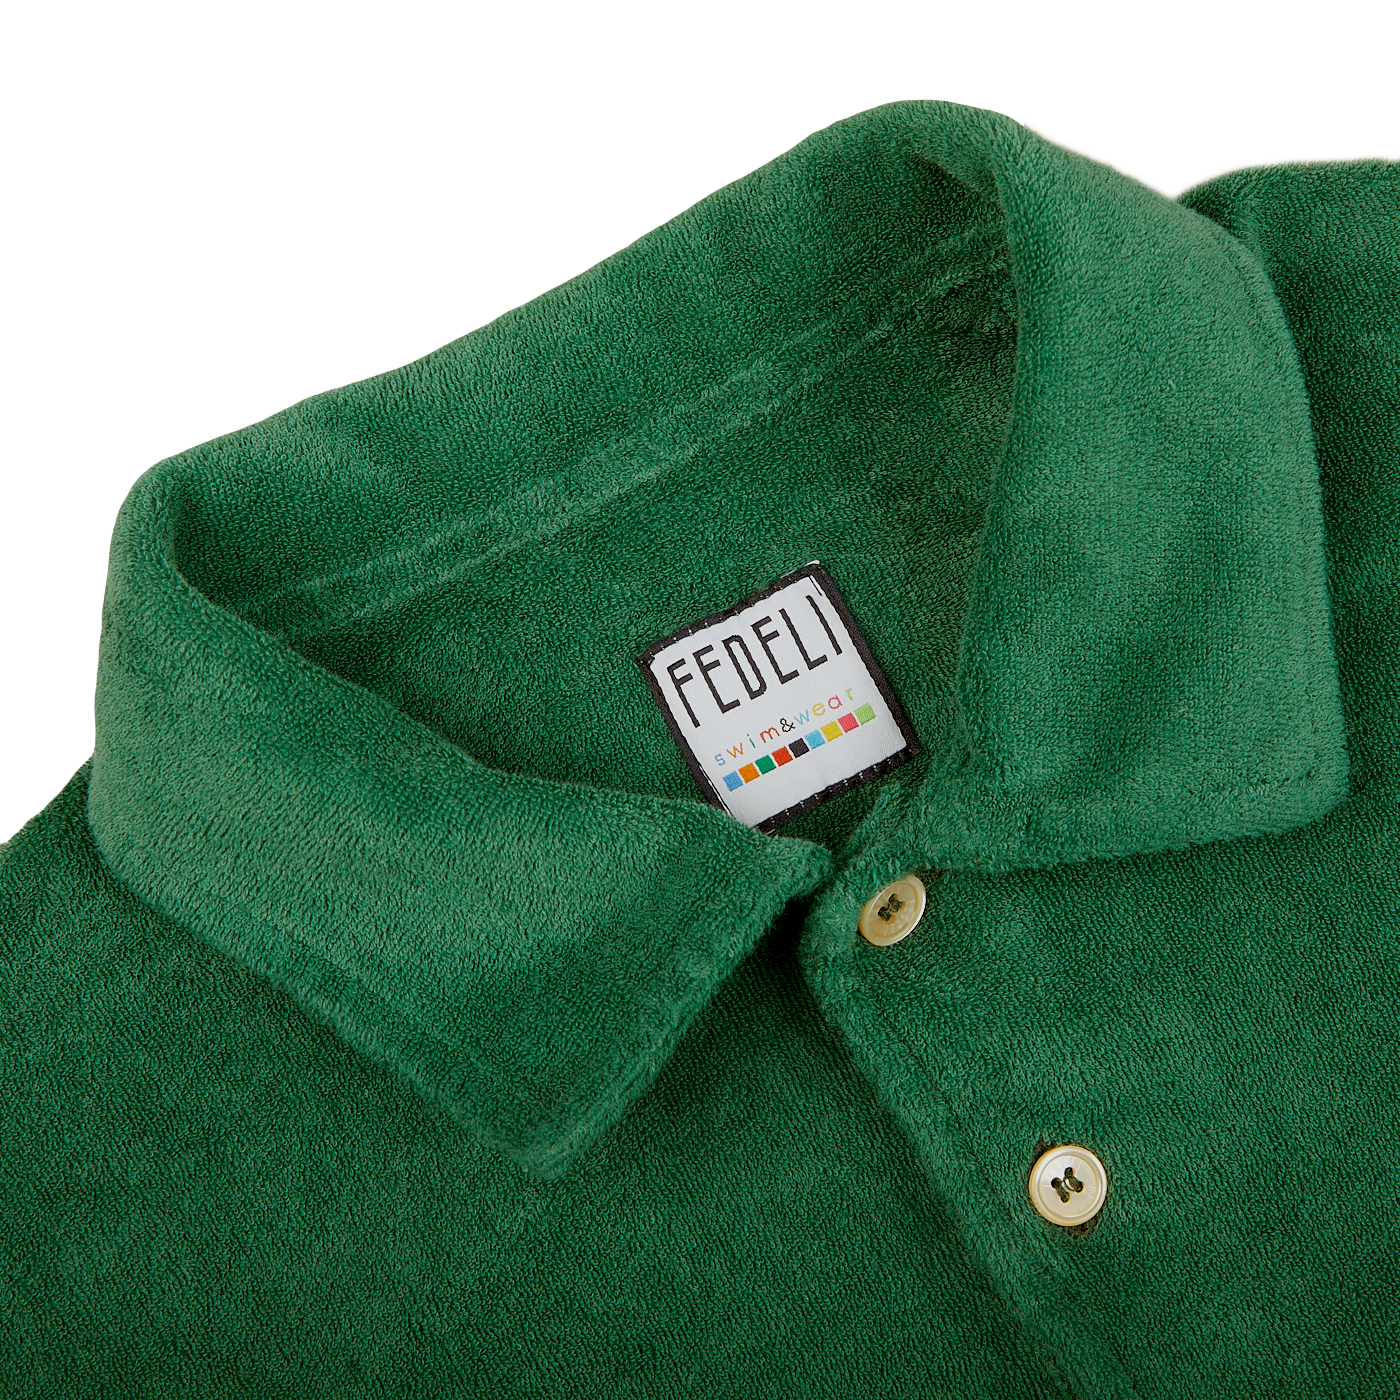 A Grass Green Cotton Towelling Polo Shirt with a Fedeli label on it.